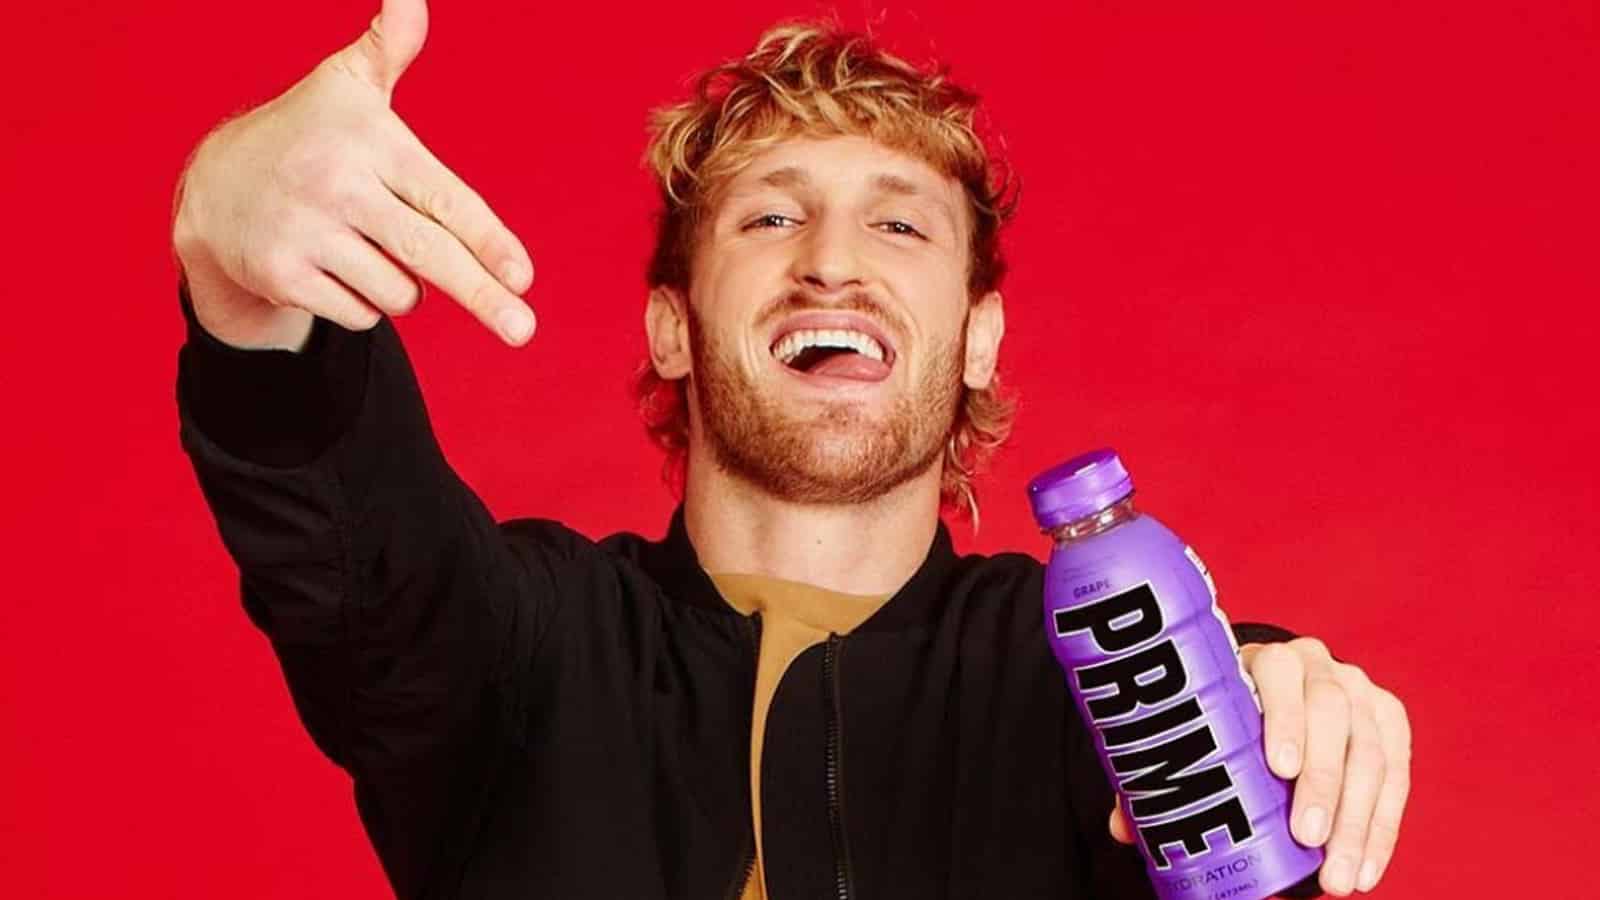 Logan Paul holds a Prime drink